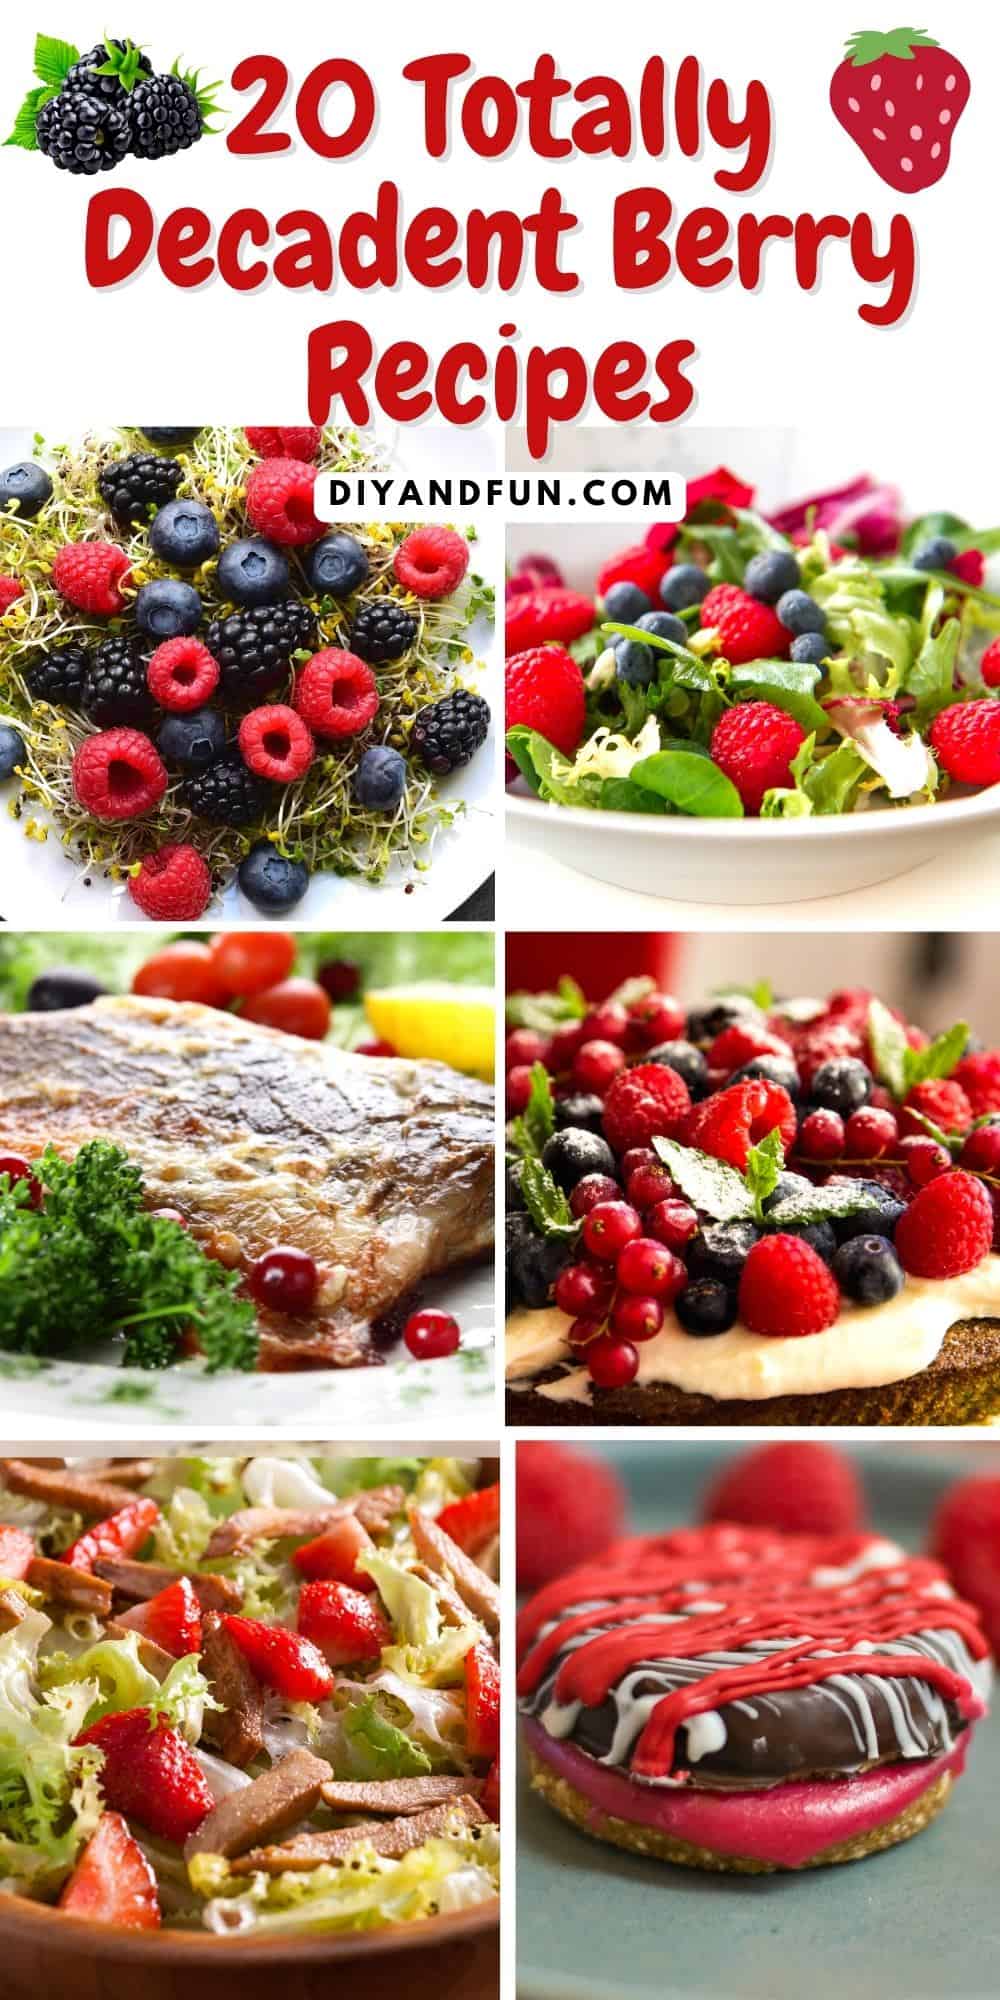 20 Totally Decadent Berry Recipes, an amazing listing of recipes that include desserts, keto, chicken, fish, and salads!